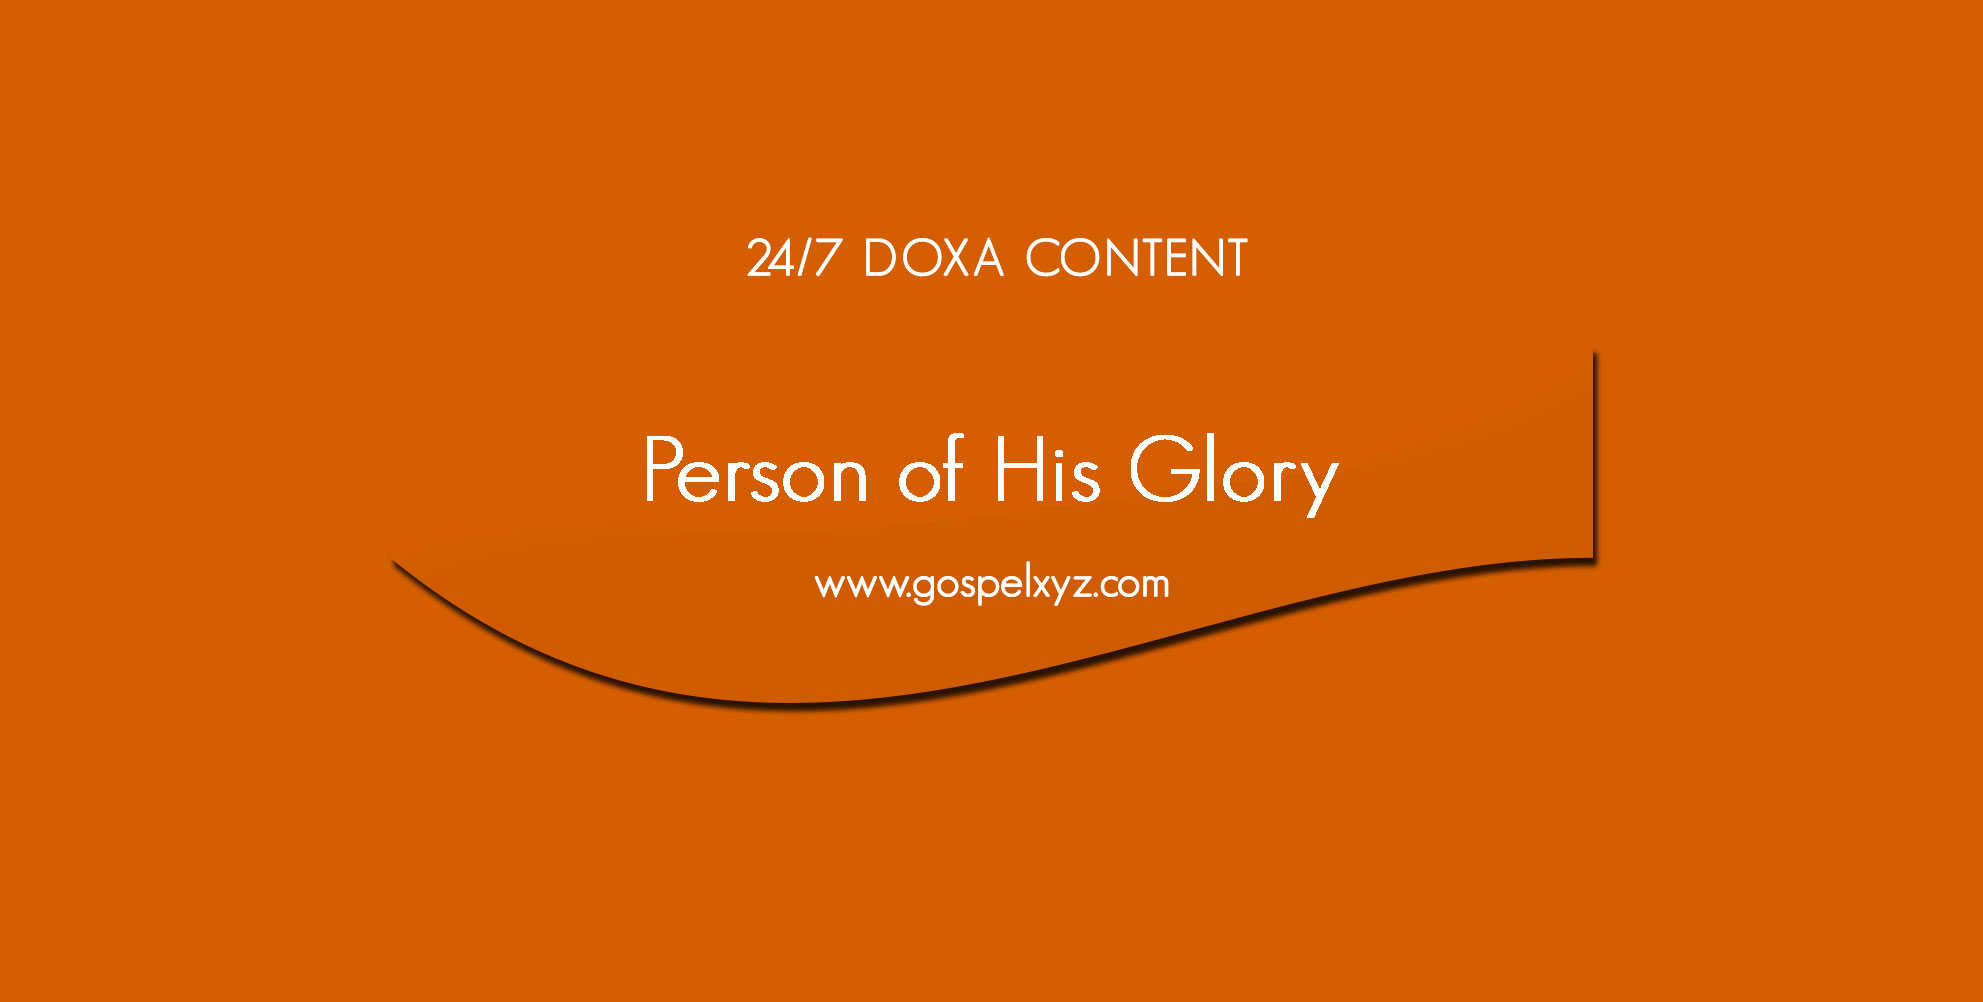 24/7 DOXA Content, 25th May-PERSON OF HIS GLORY